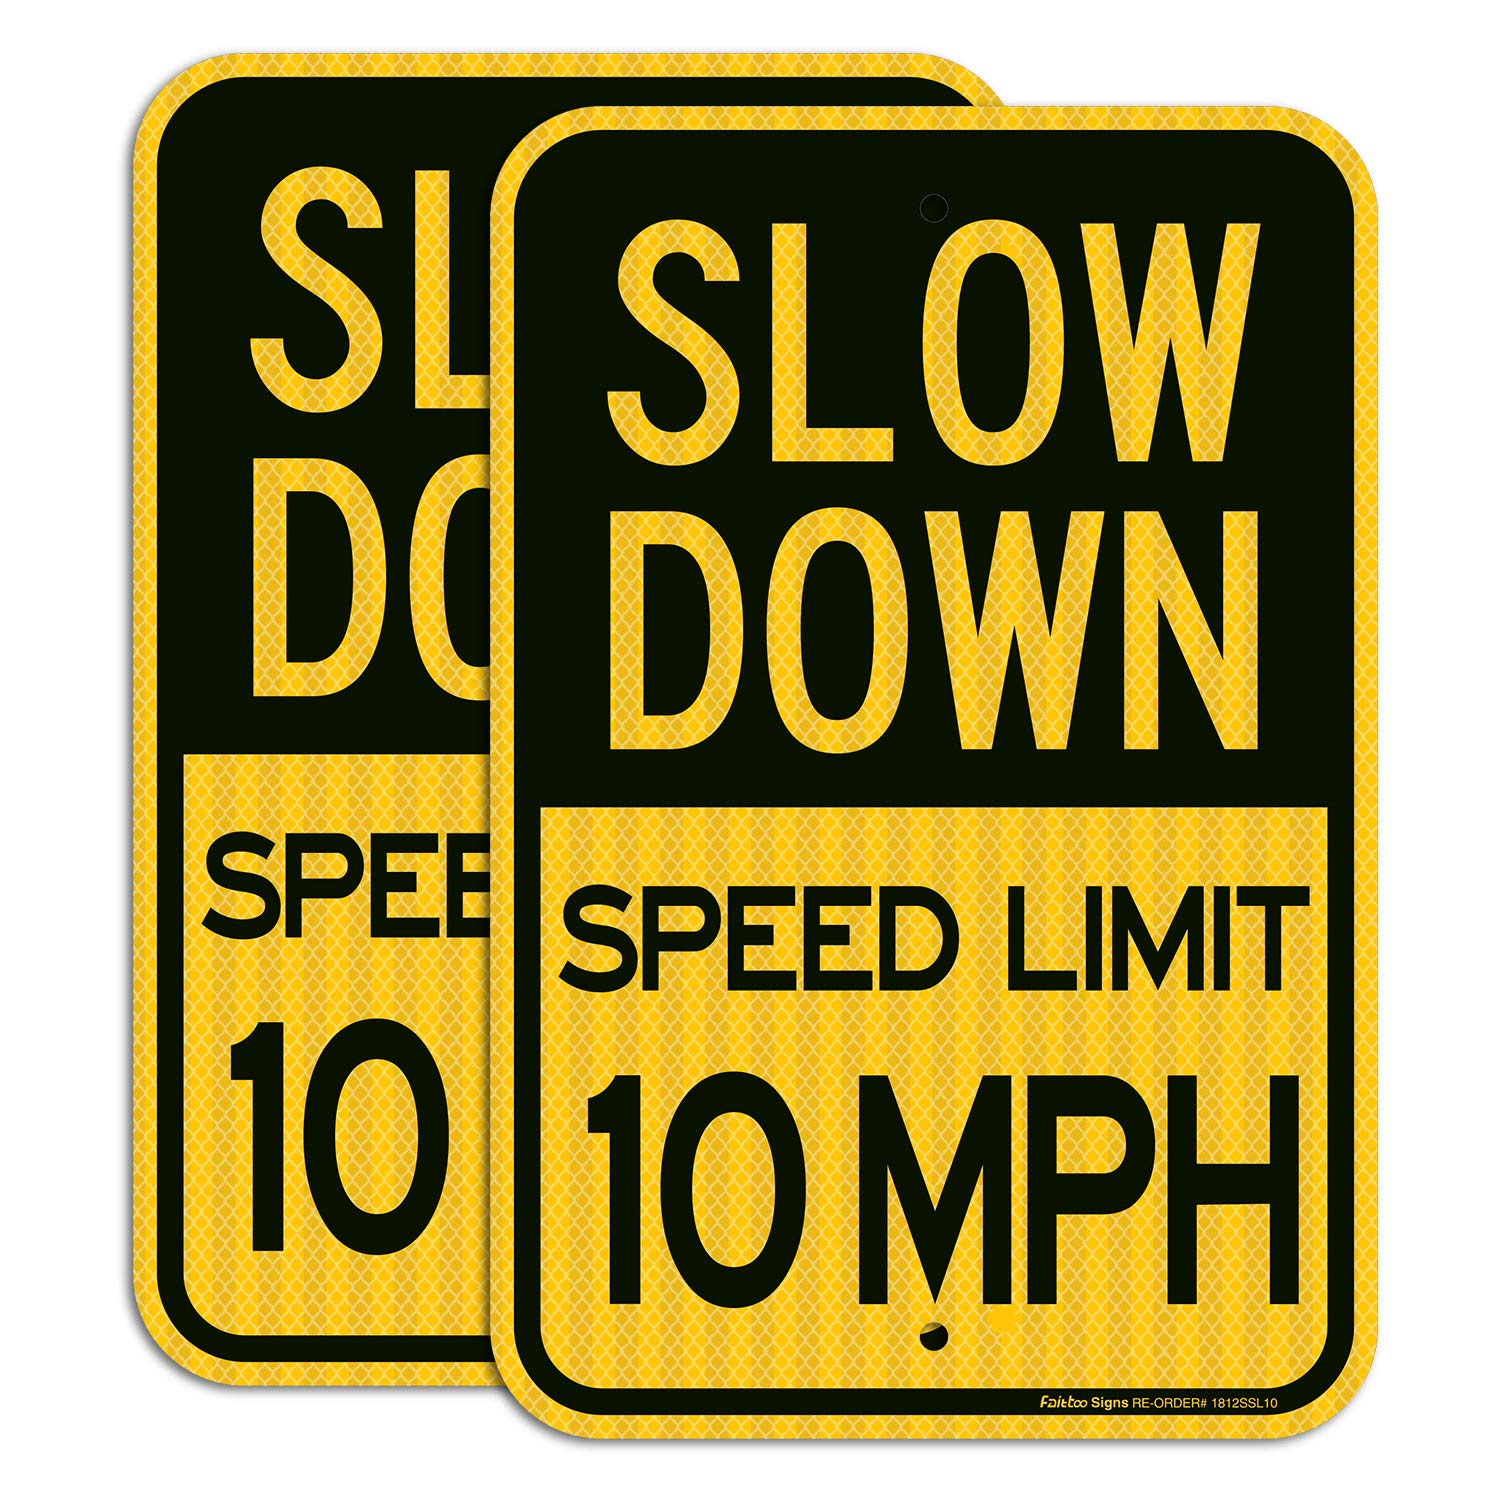 Slow Down Speed Limit 5 MPH Sign, Slow Down Sign, 18 x 12 Inches Engineer Grade Reflective Sheeting, Rust Free Aluminum, Weather Resistant, Waterproof, Durable Ink, Easy to Mount